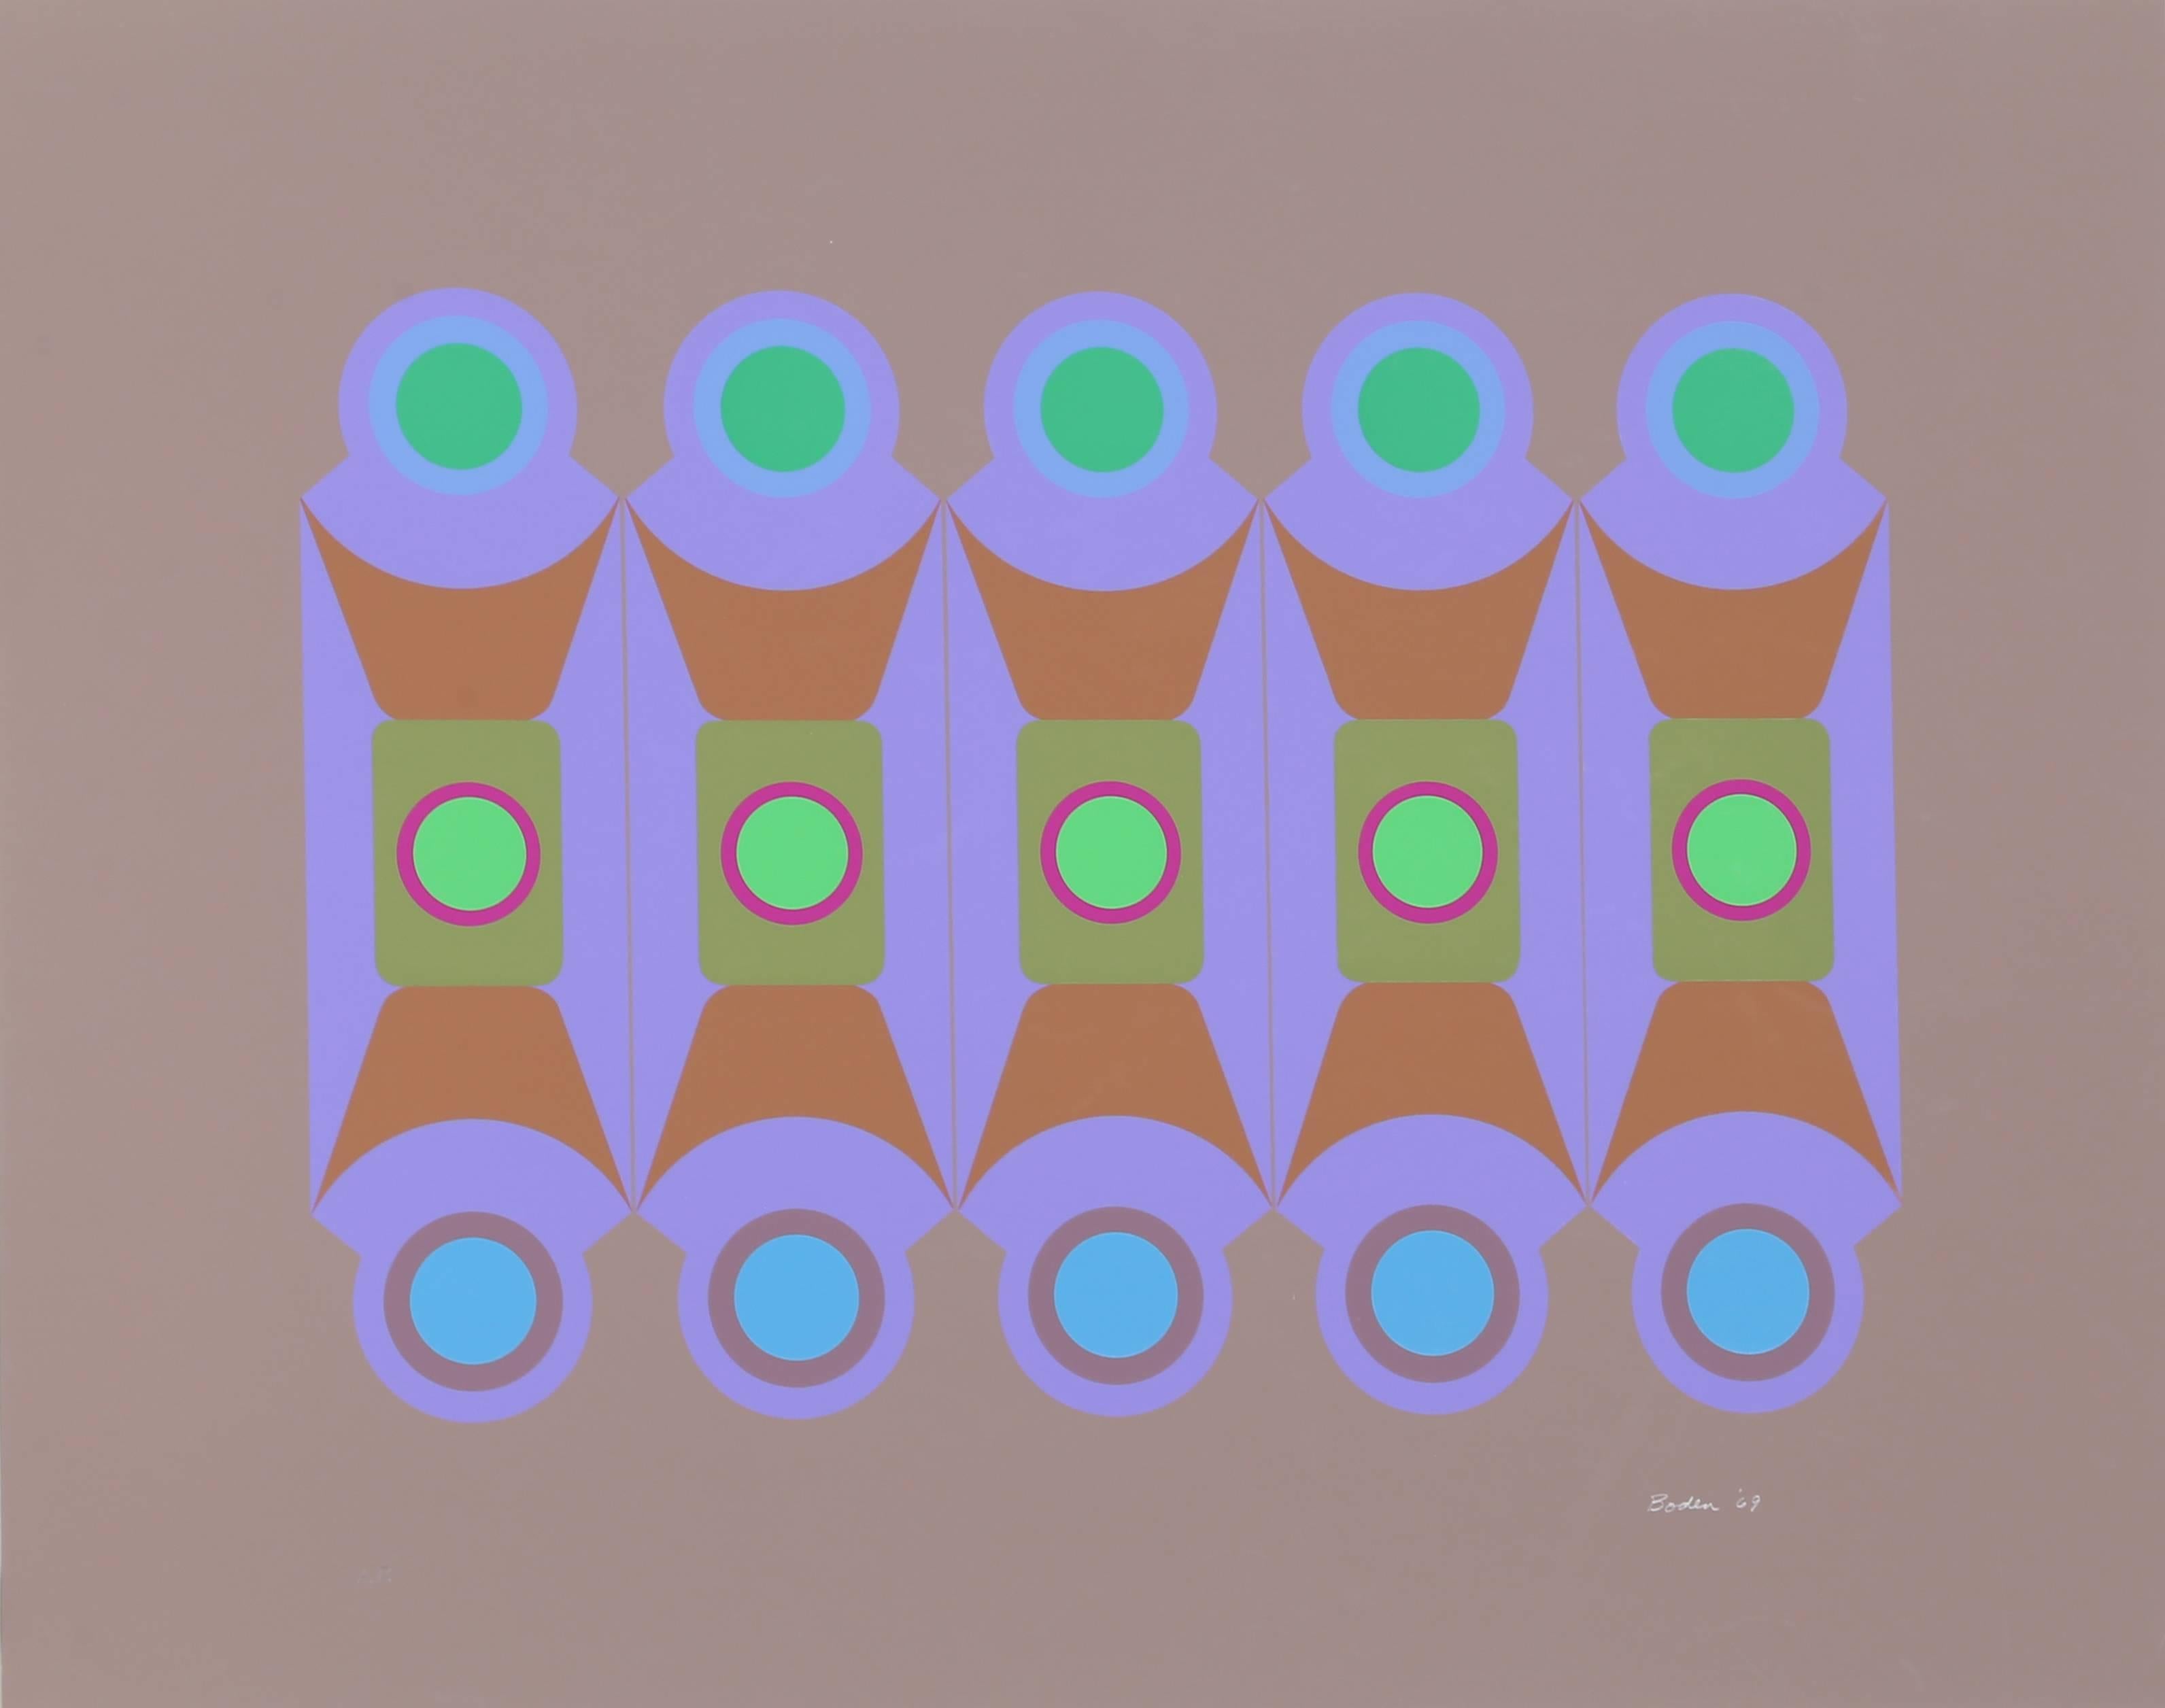 Artist: Arthur Boden
Title: Untitled
Year: 1969
Medium: Serigraph, signed in pencil
Edition: AP
Size: Size: 23 in. x 29.5 in. (58.42 cm x 74.93 cm)